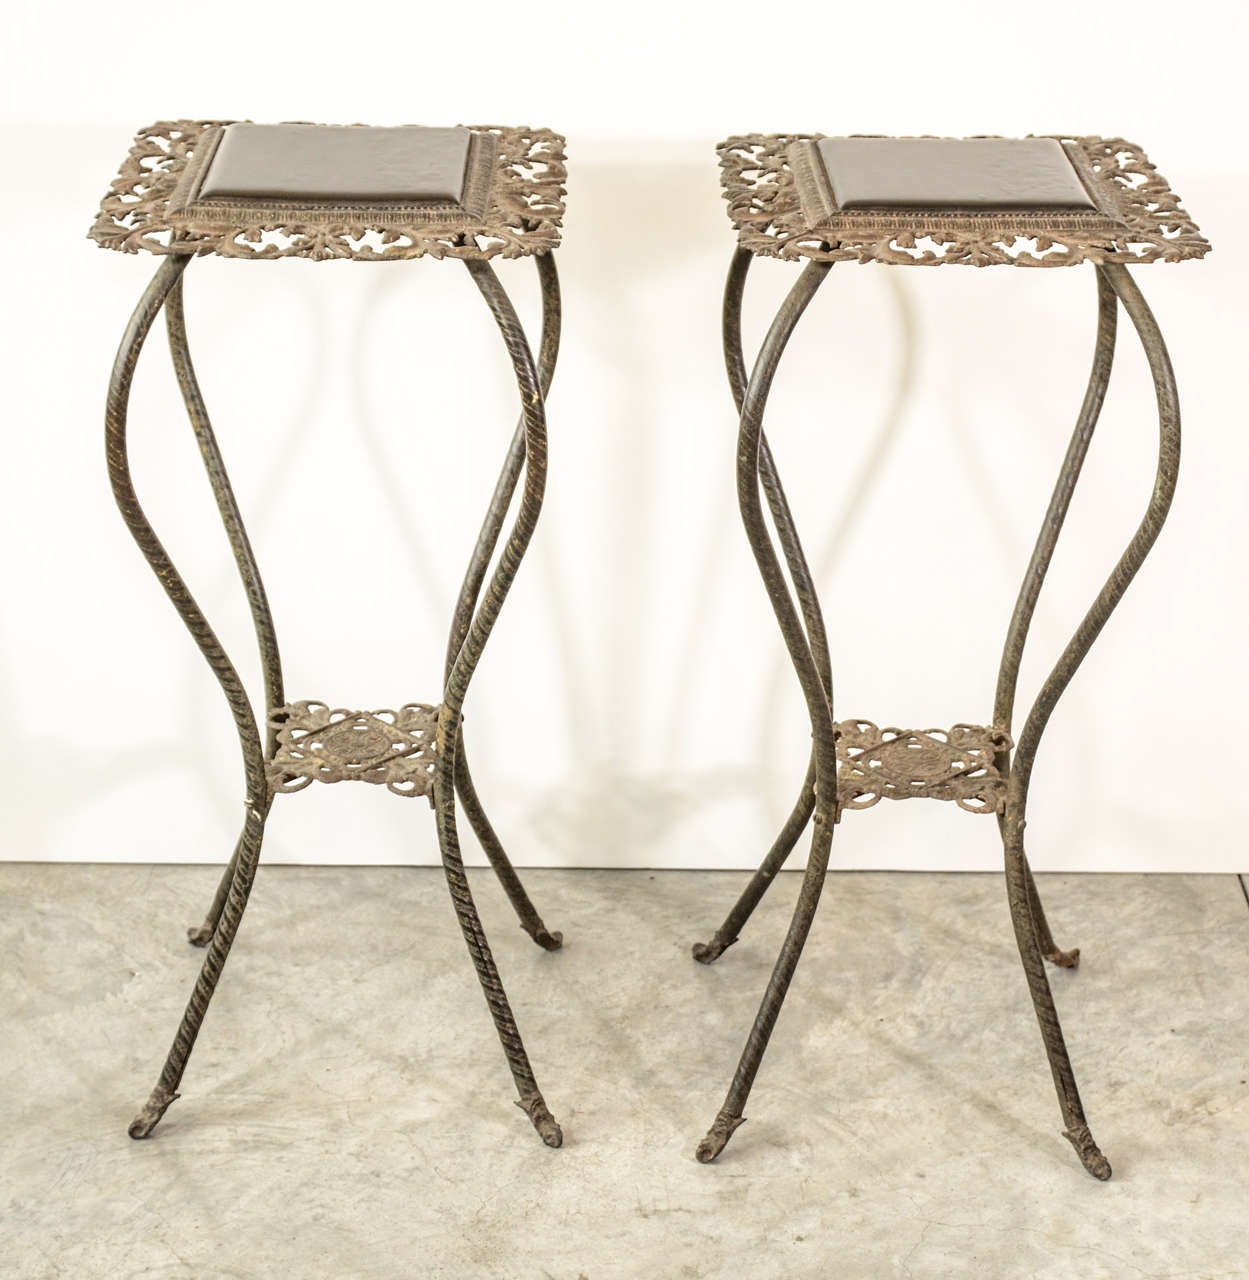 Pair of Iron Flower Stands For Sale at 1stDibs